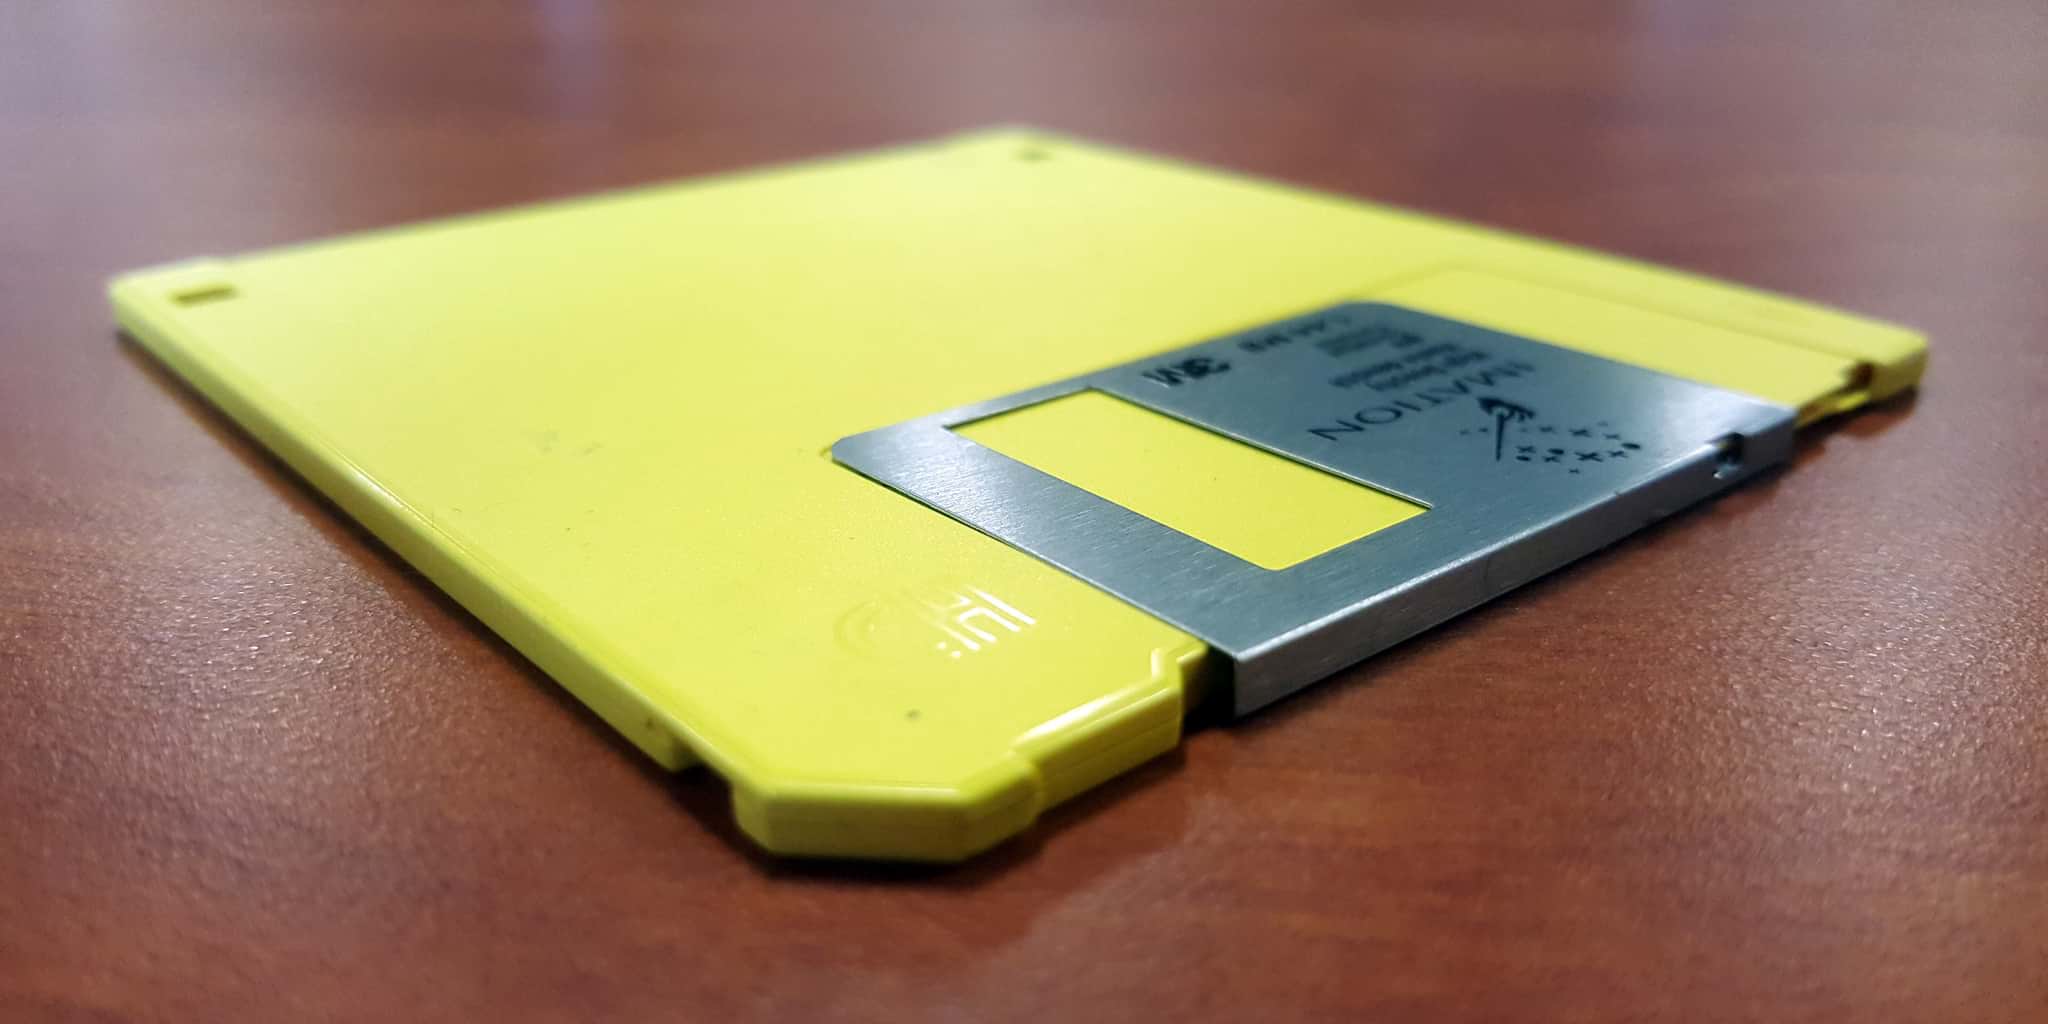 A Floppy Disk - An example of a storage device that uses the FAT file system.